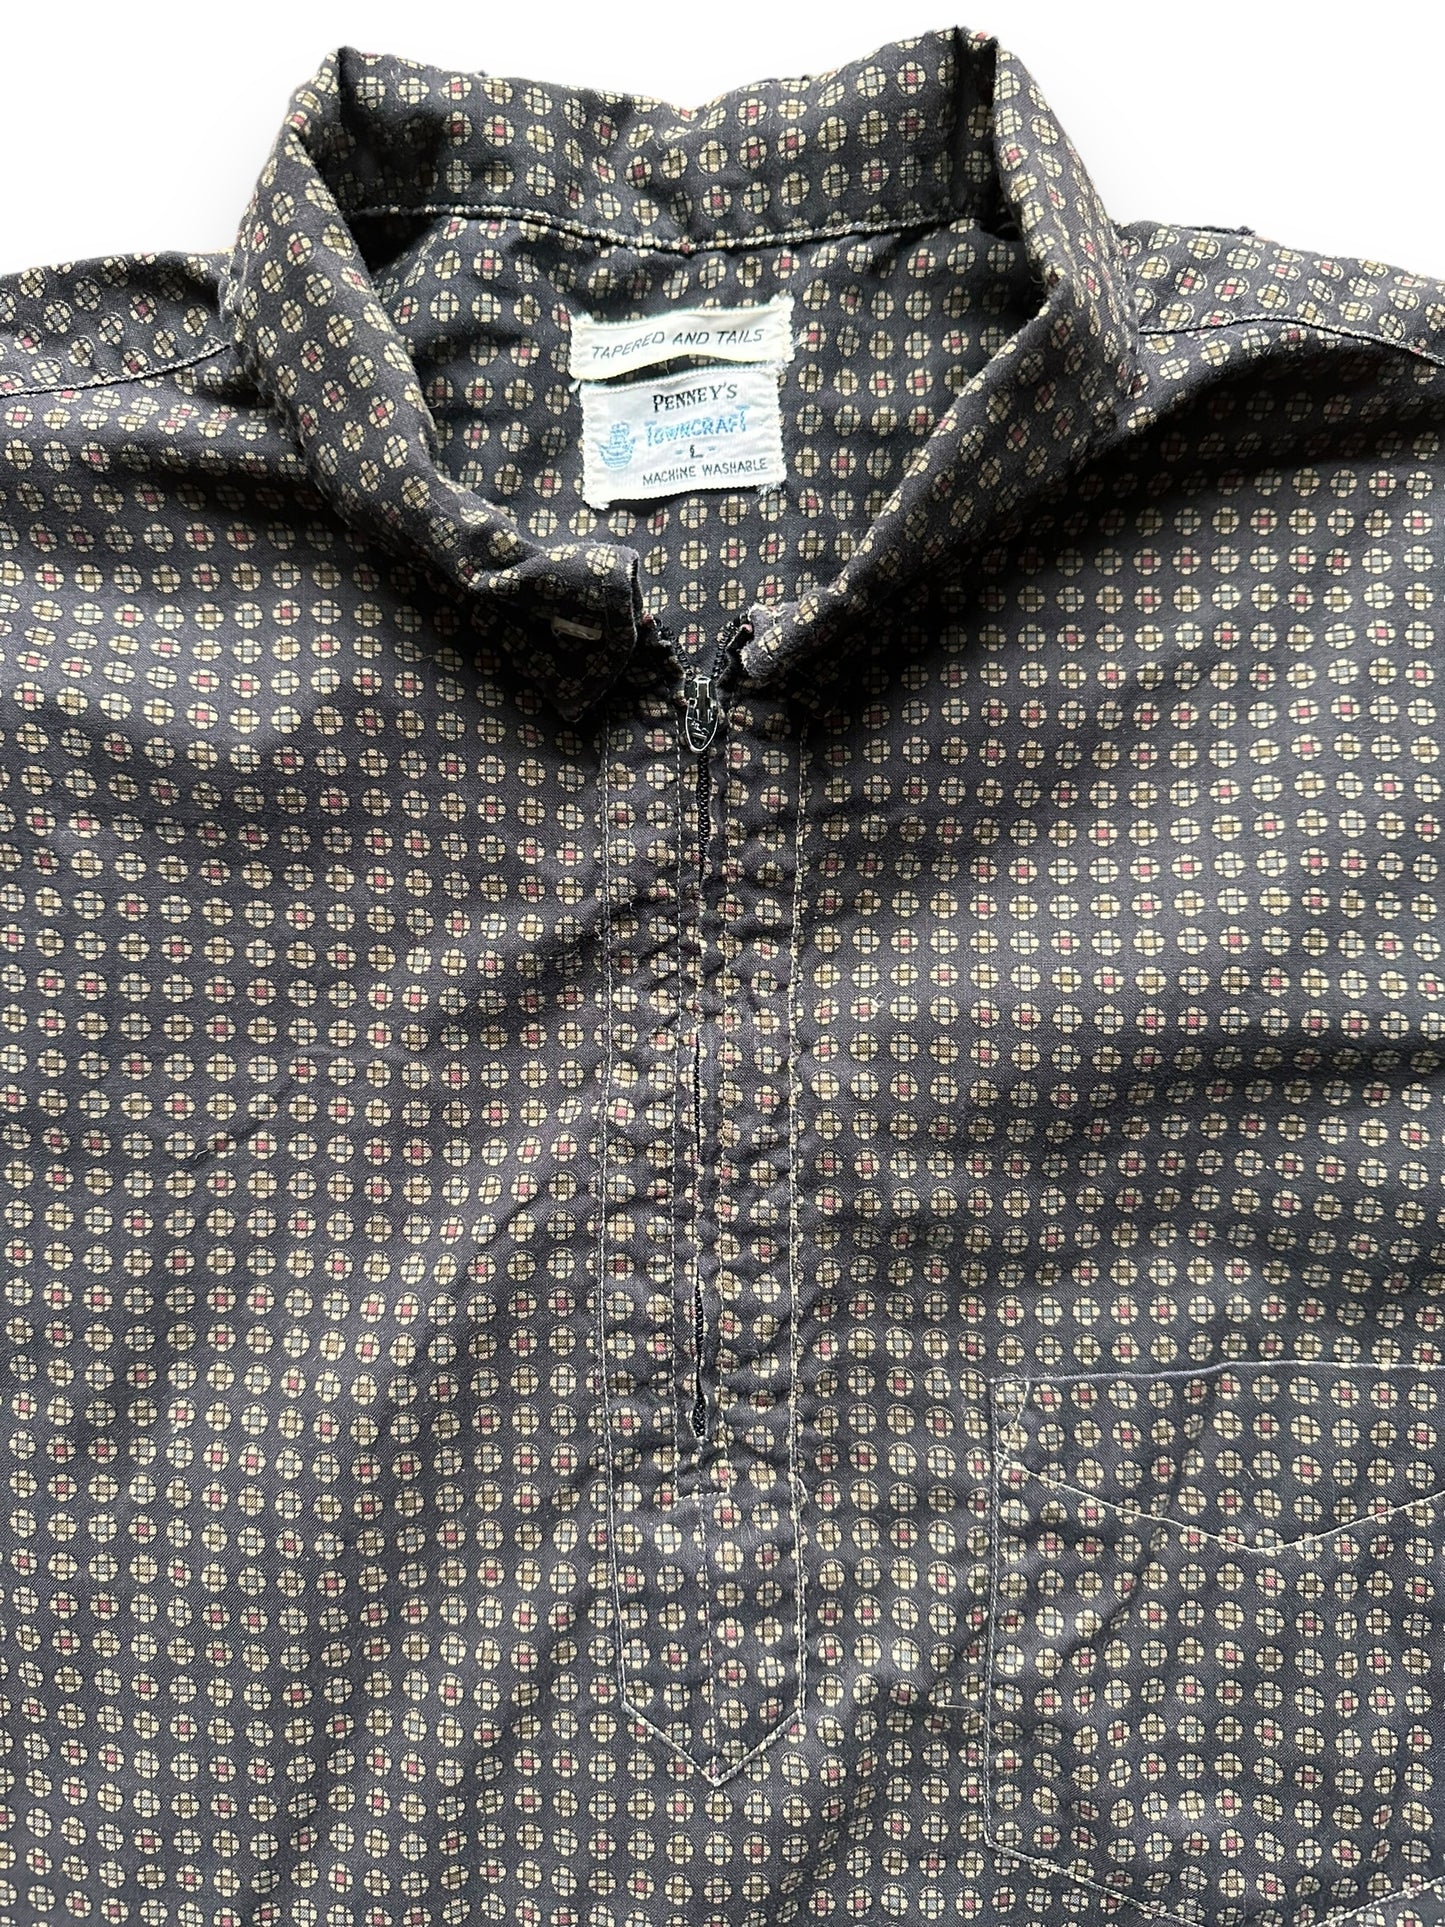 Collar and Tag View of Vintage Penney's Towncraft 1/4 Zip Long Sleeve Shirt SZ L| Vintage Rockabilly Shirt Seattle | Barn Owl Vintage Clothing Seattle